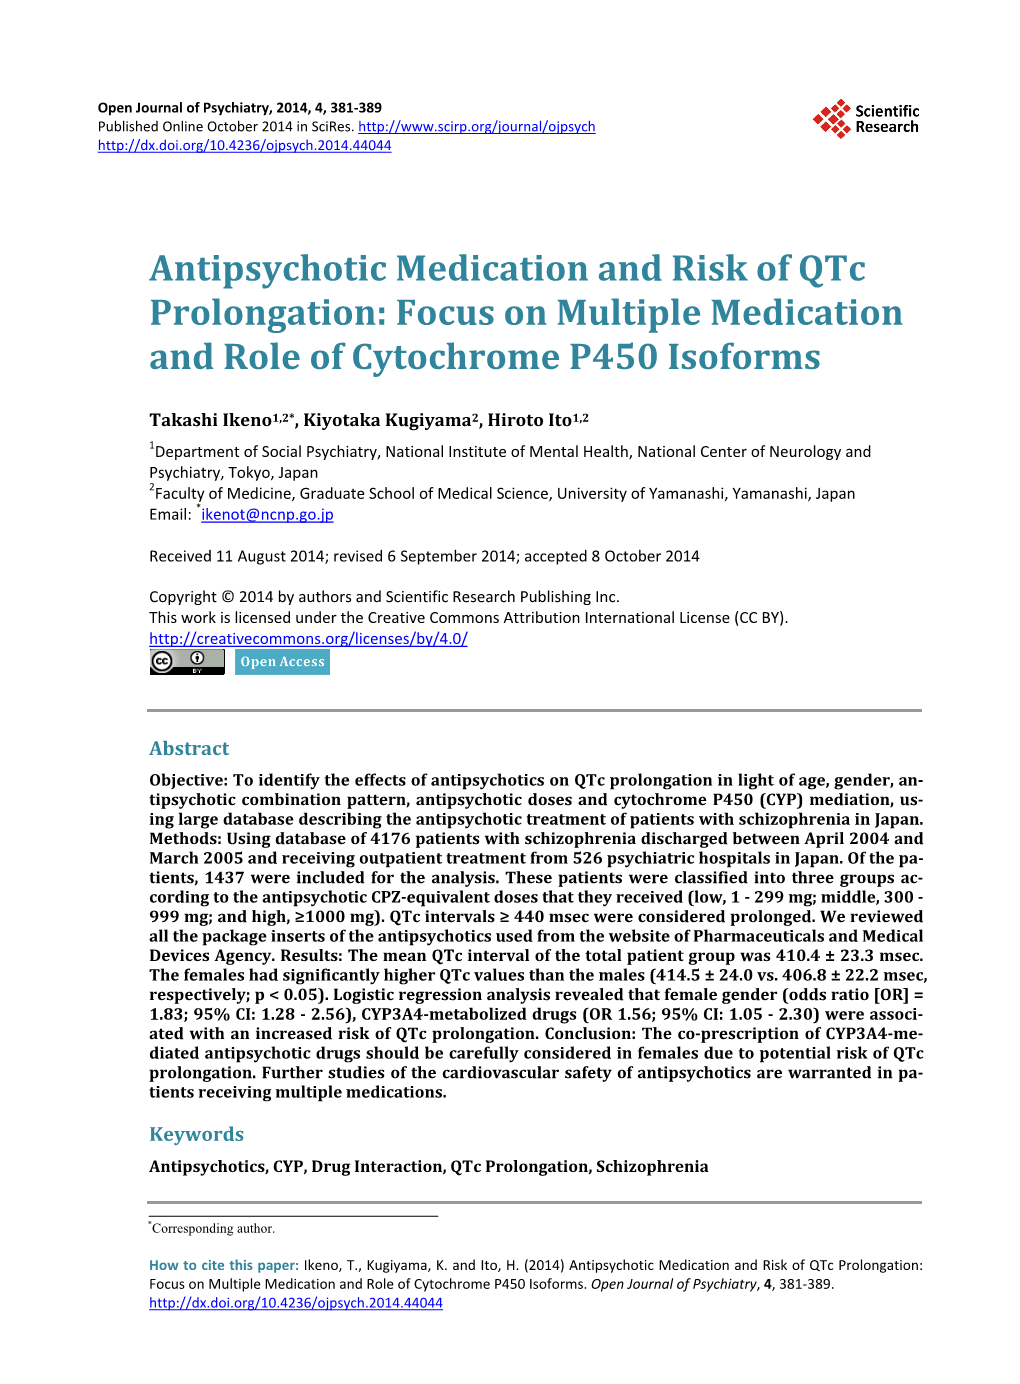 Antipsychotic Medication and Risk of Qtc Prolongation: Focus on Multiple Medication and Role of Cytochrome P450 Isoforms